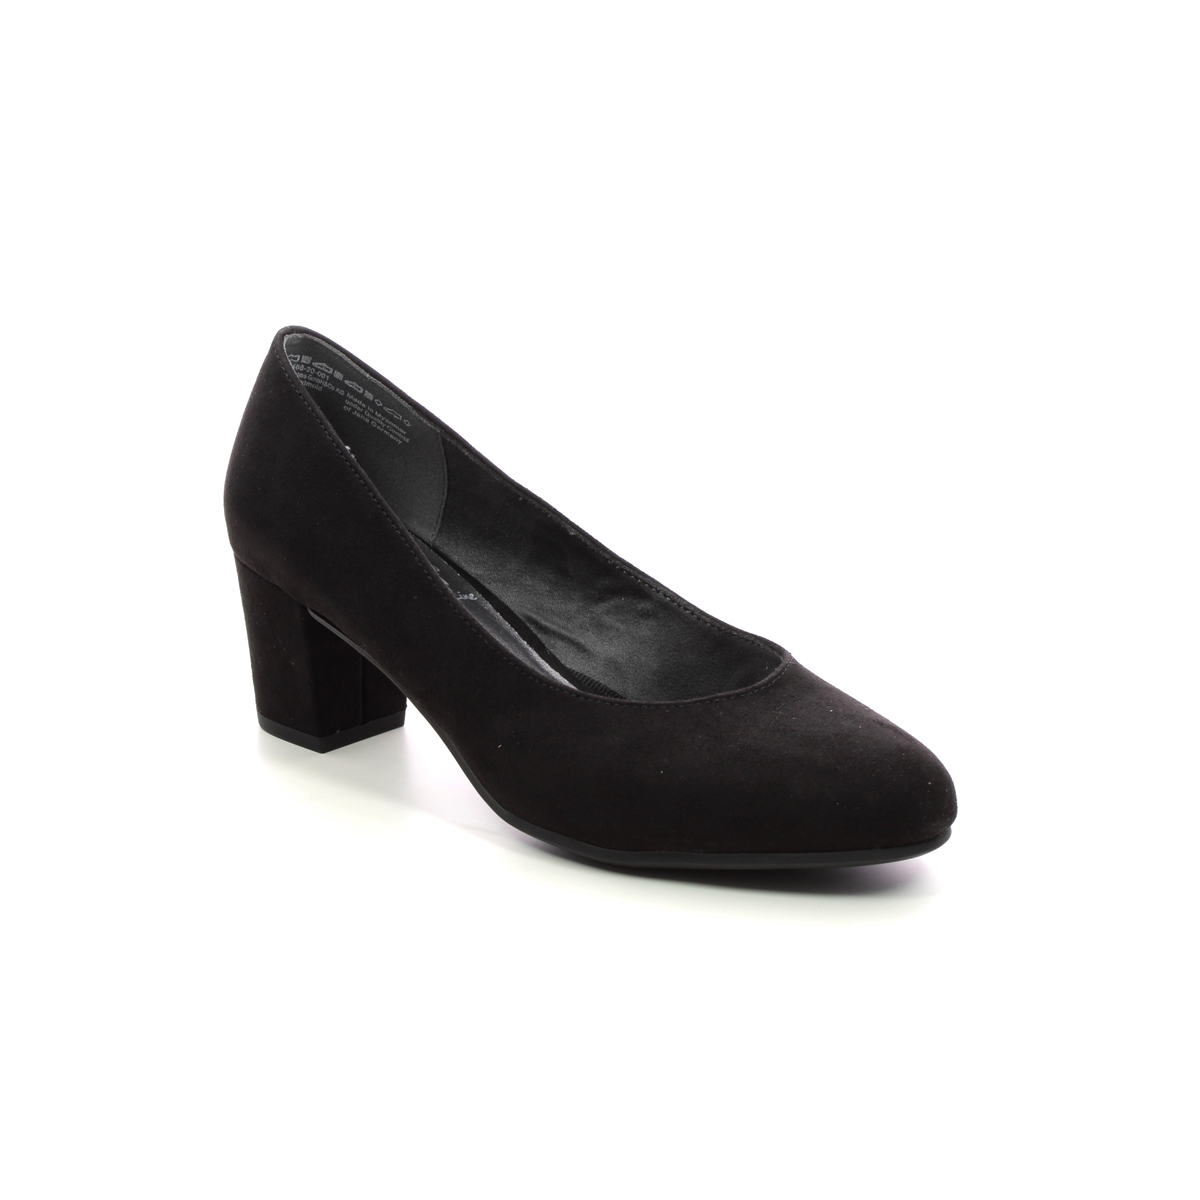 Jana Abuplain Wide Black Womens Court Shoes 22478-42-001 in a Plain Textile in Size 36